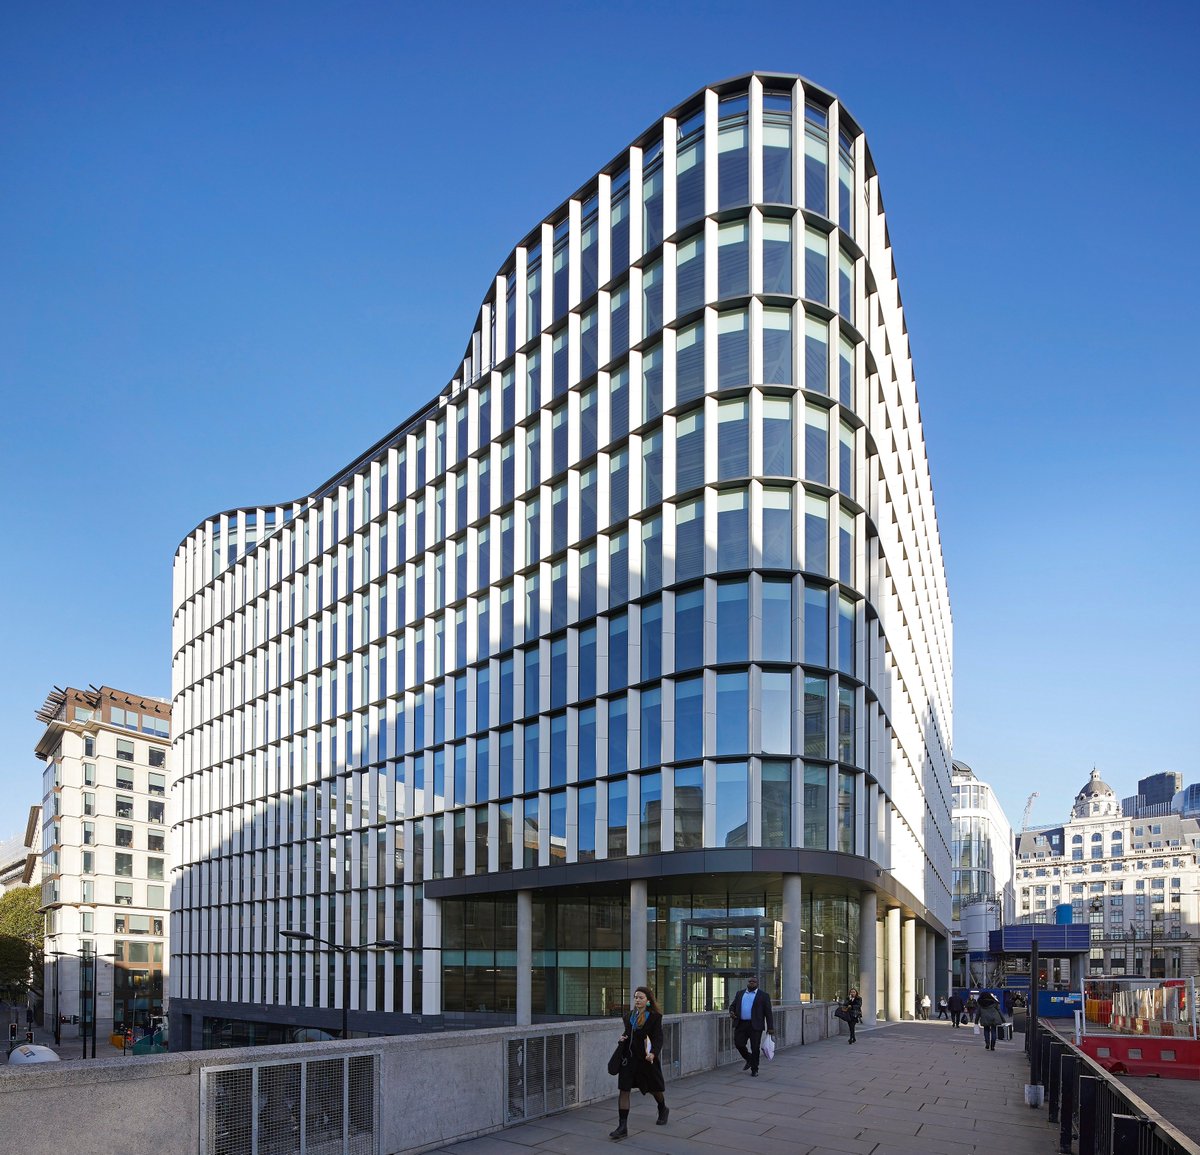 Our fingers are crossed for 33 Central in the 'Commercial Workplace' category at today's @BCO_UK #BCOAwards! @WellsFargoNews @JRArchitects #33Central #commercialproperty #realestate